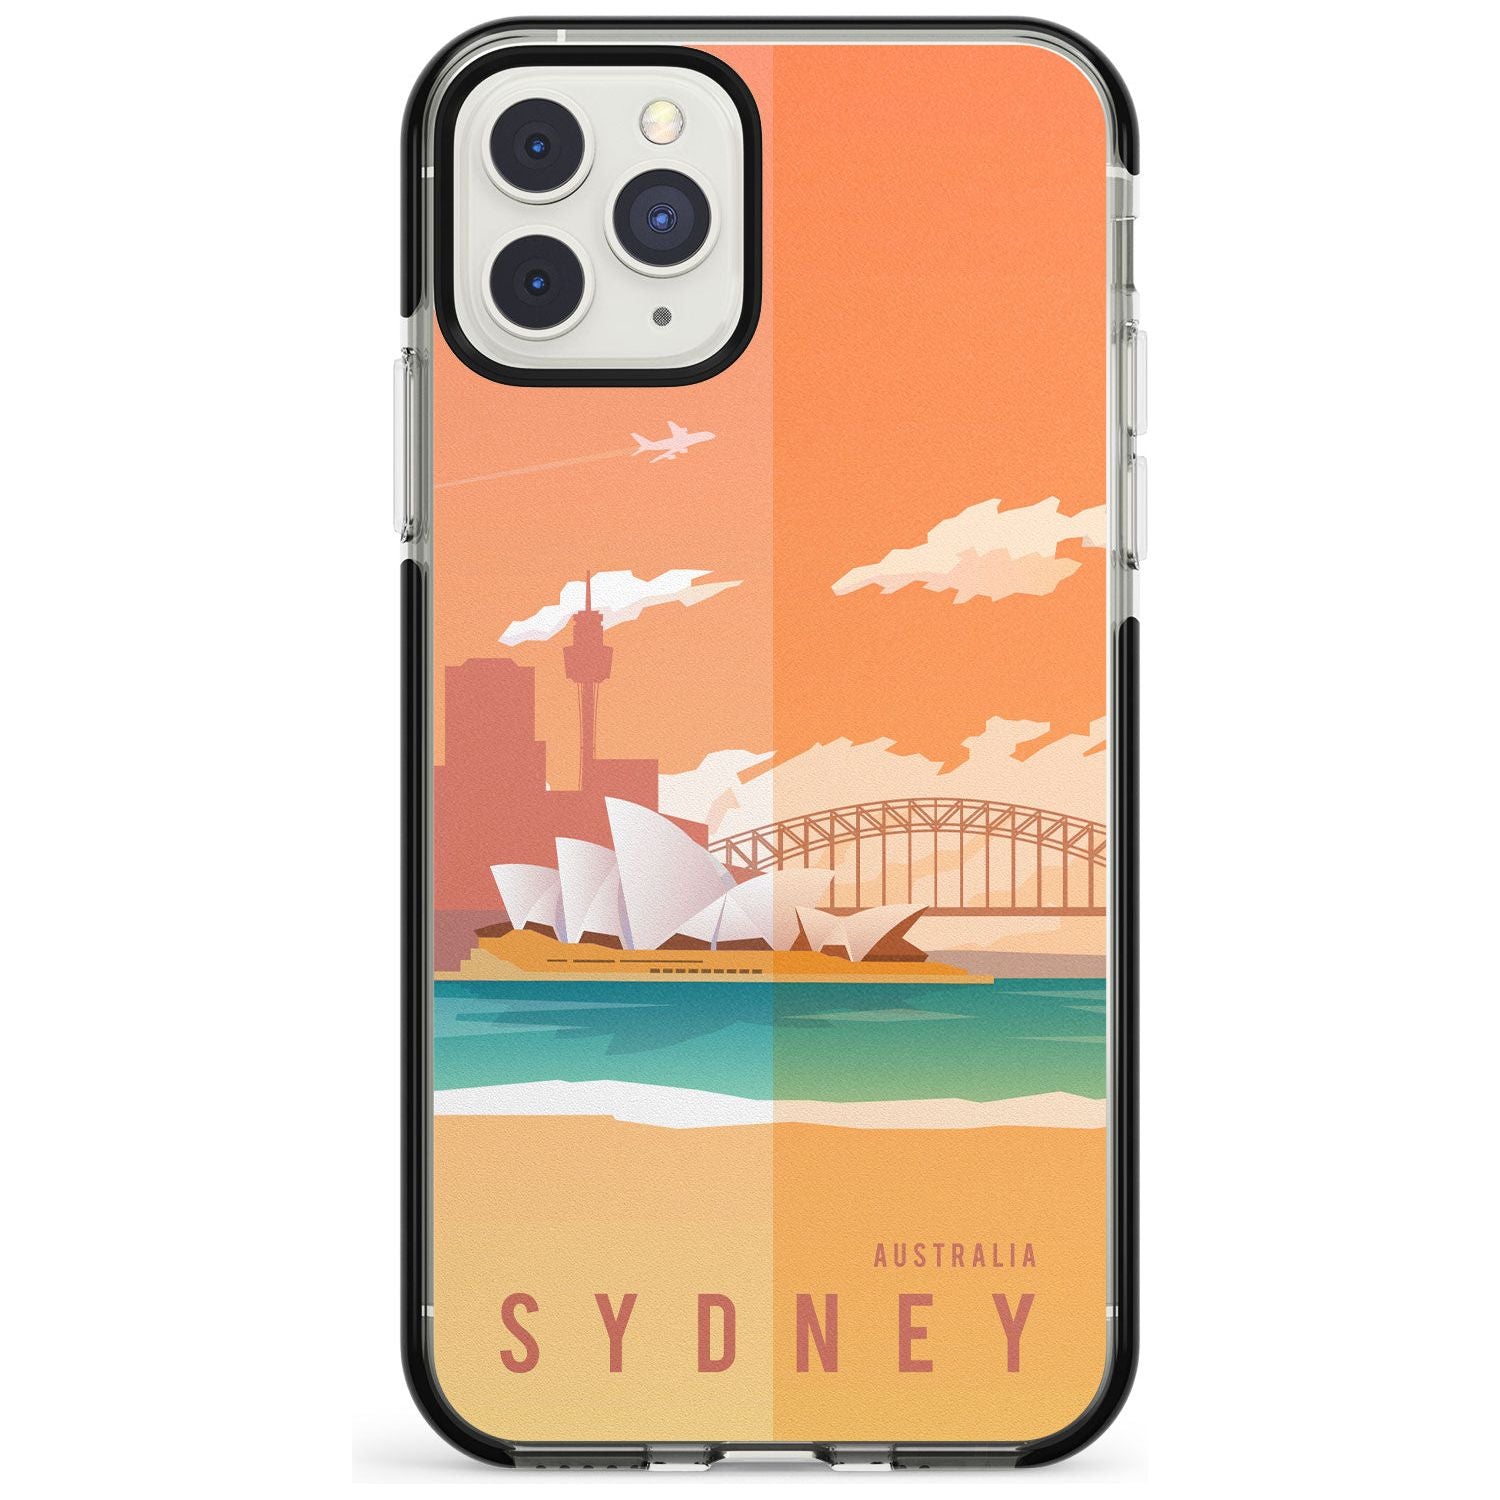 Vintage Travel Poster Sydney Black Impact Phone Case for iPhone 11 Pro Max